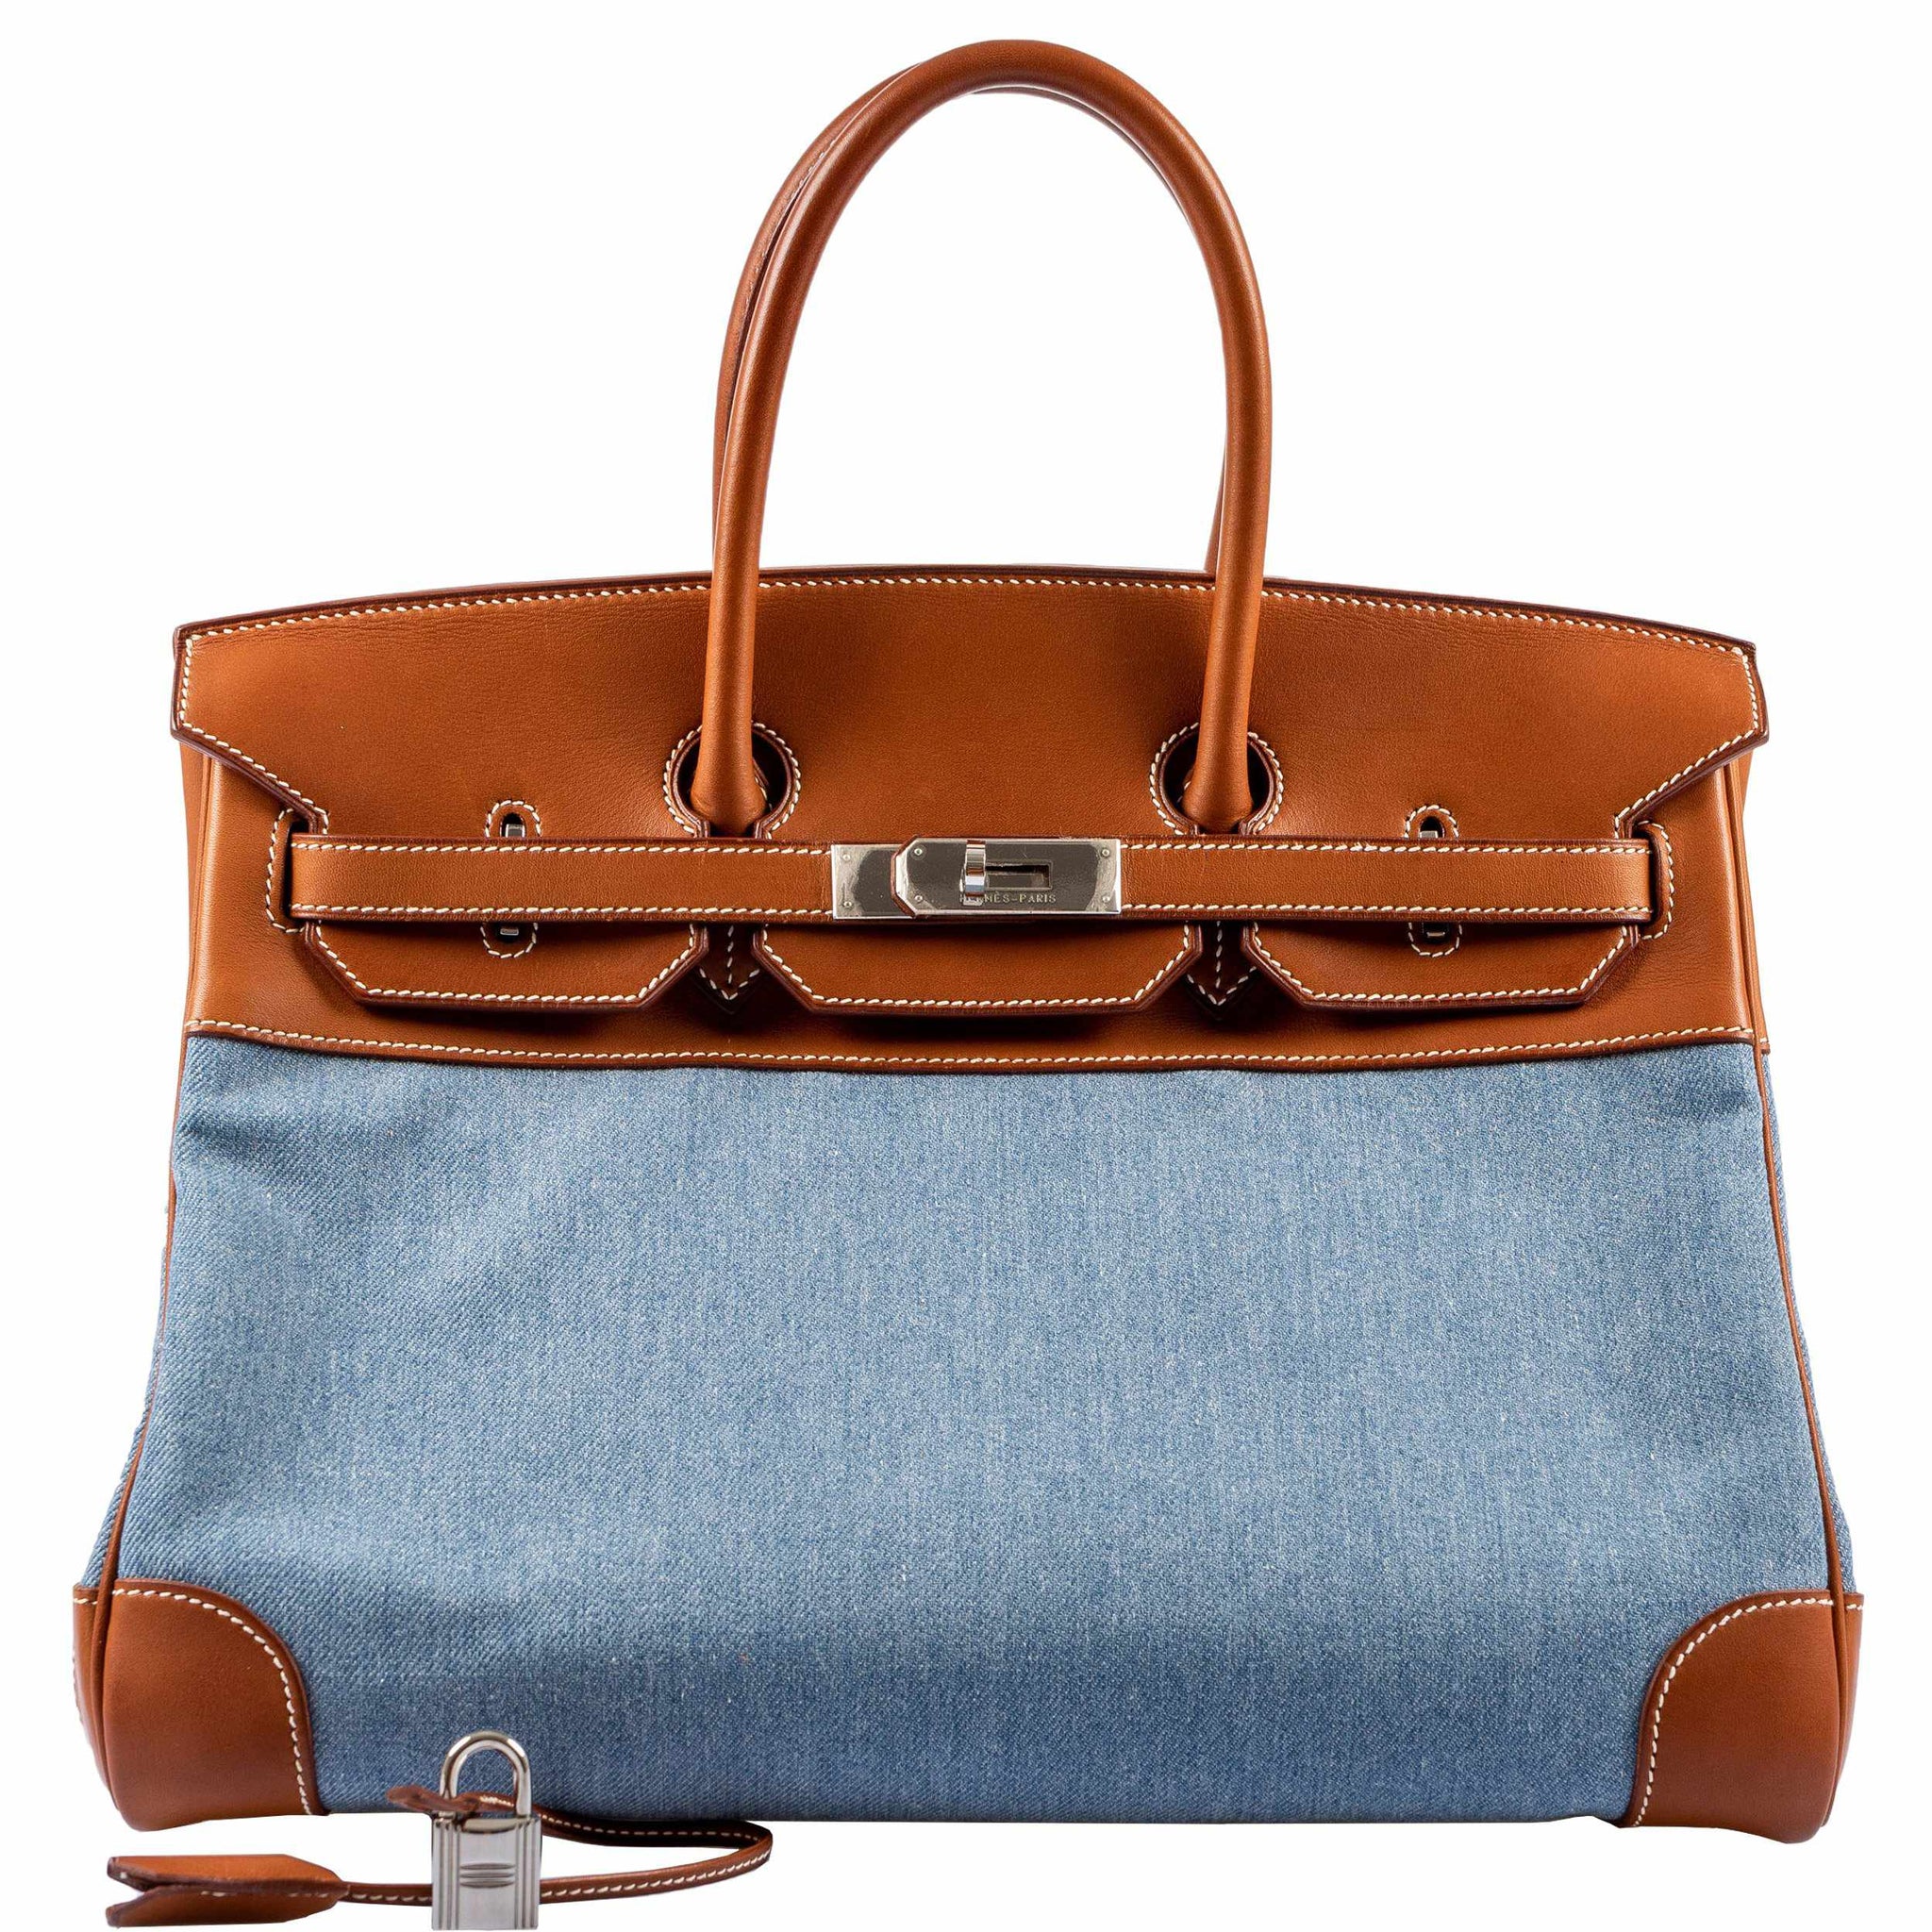 Hermes Birkin 35cm Collection - JaneFinds – Page 3